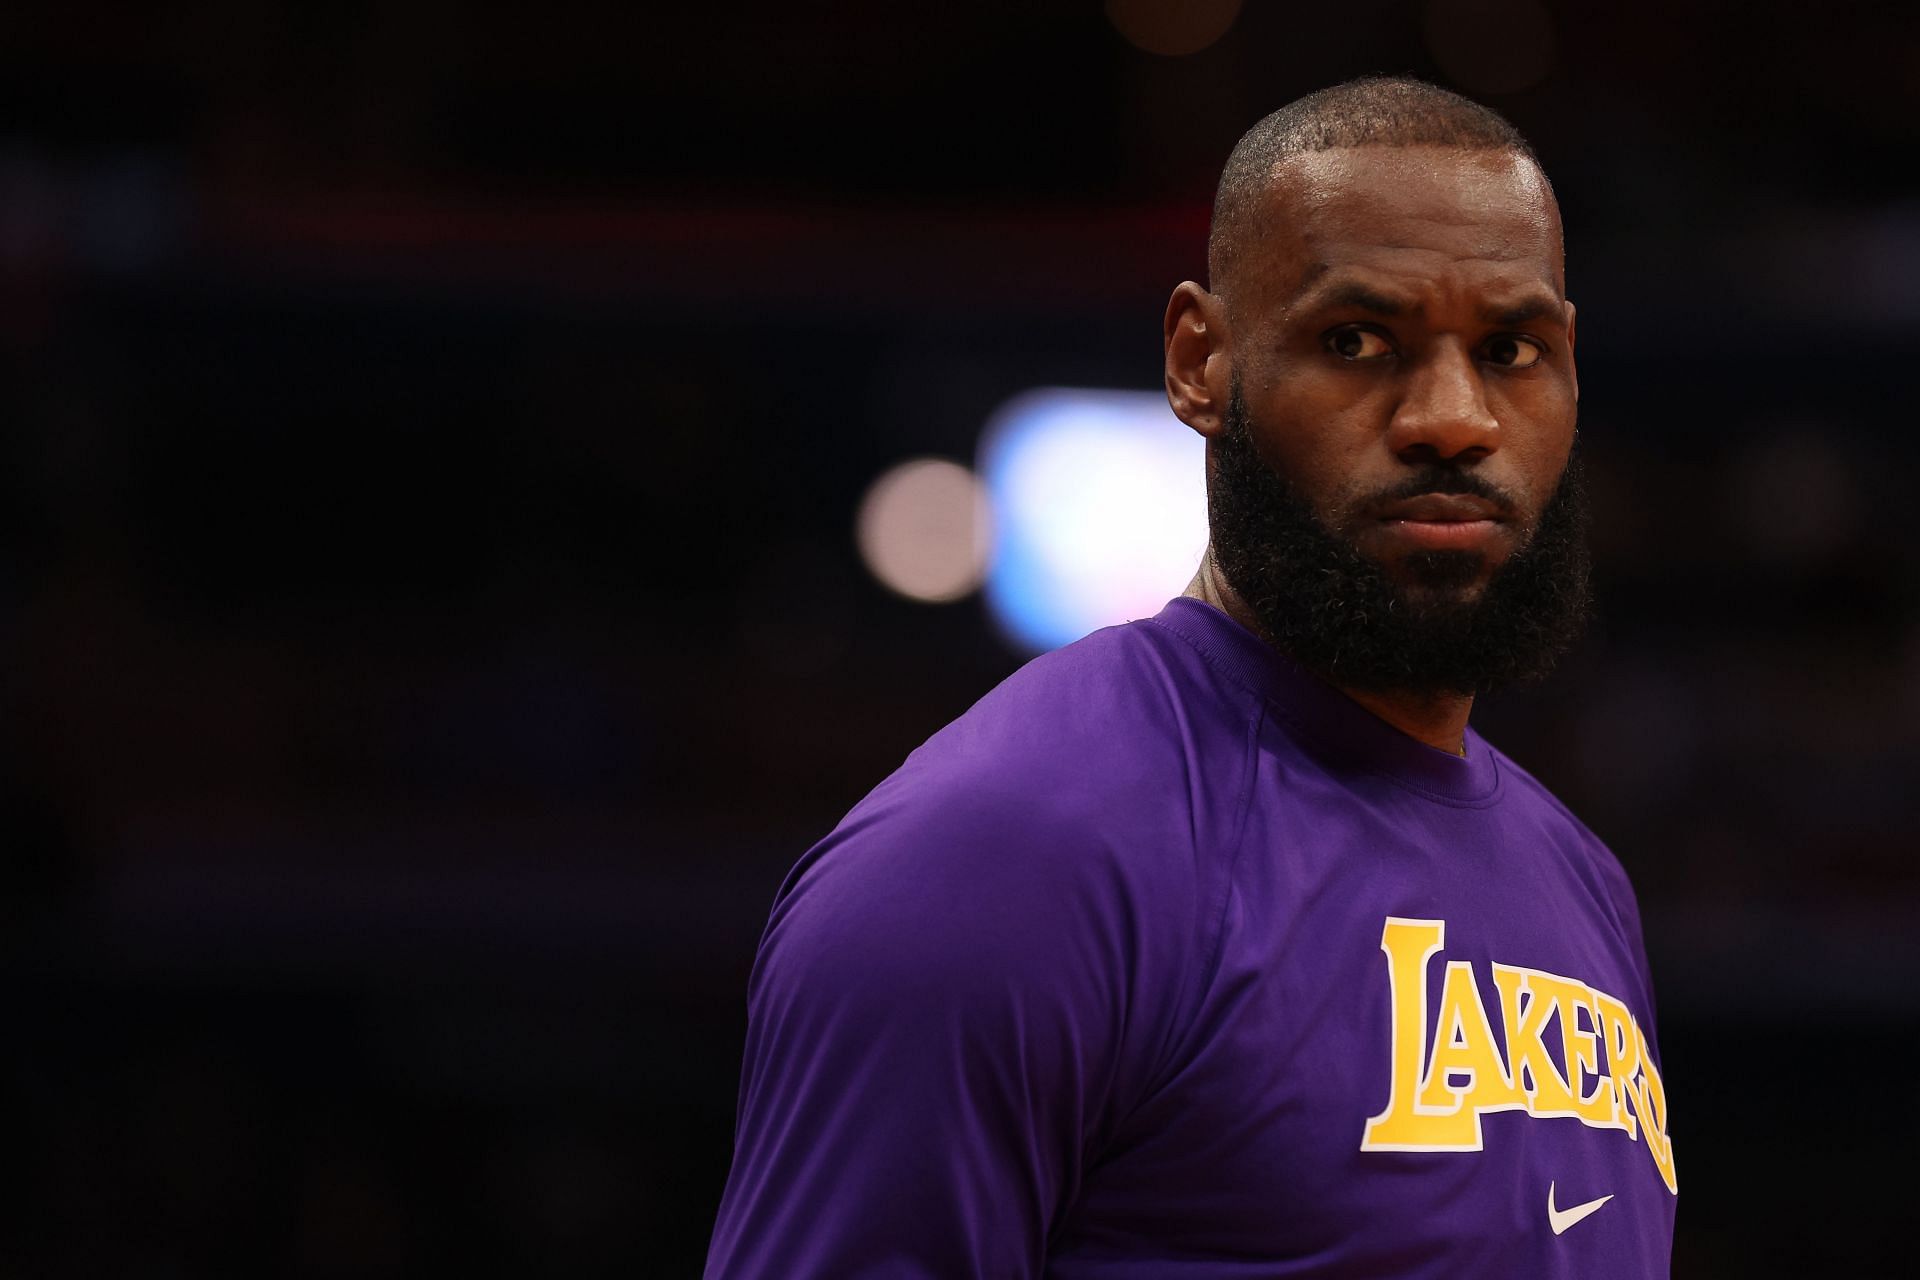 LA Lakers star LeBron James warms up before a game.